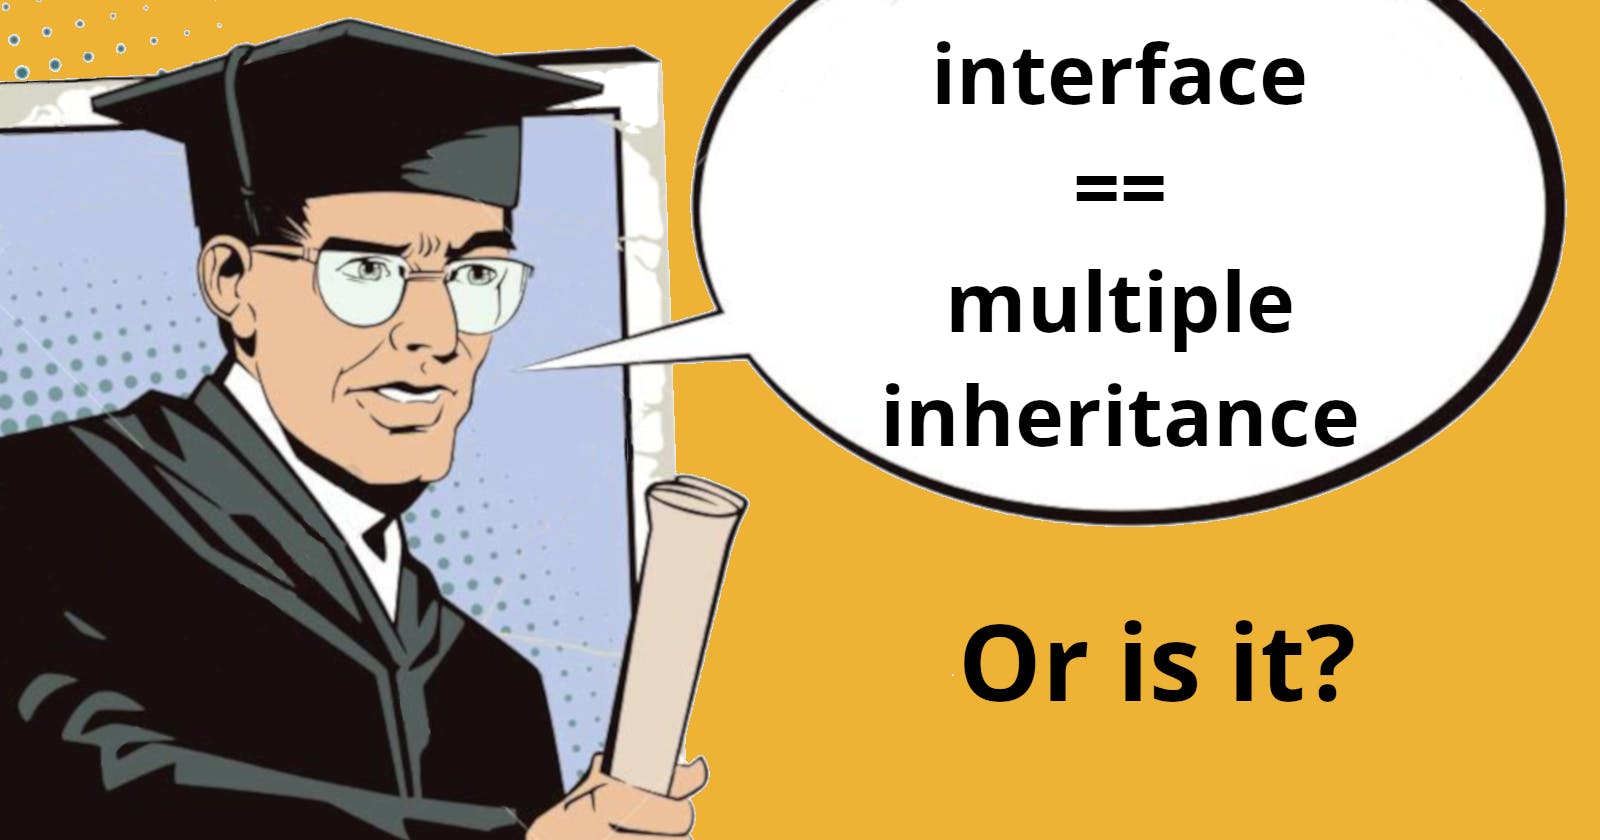 Do you really understand interfaces?